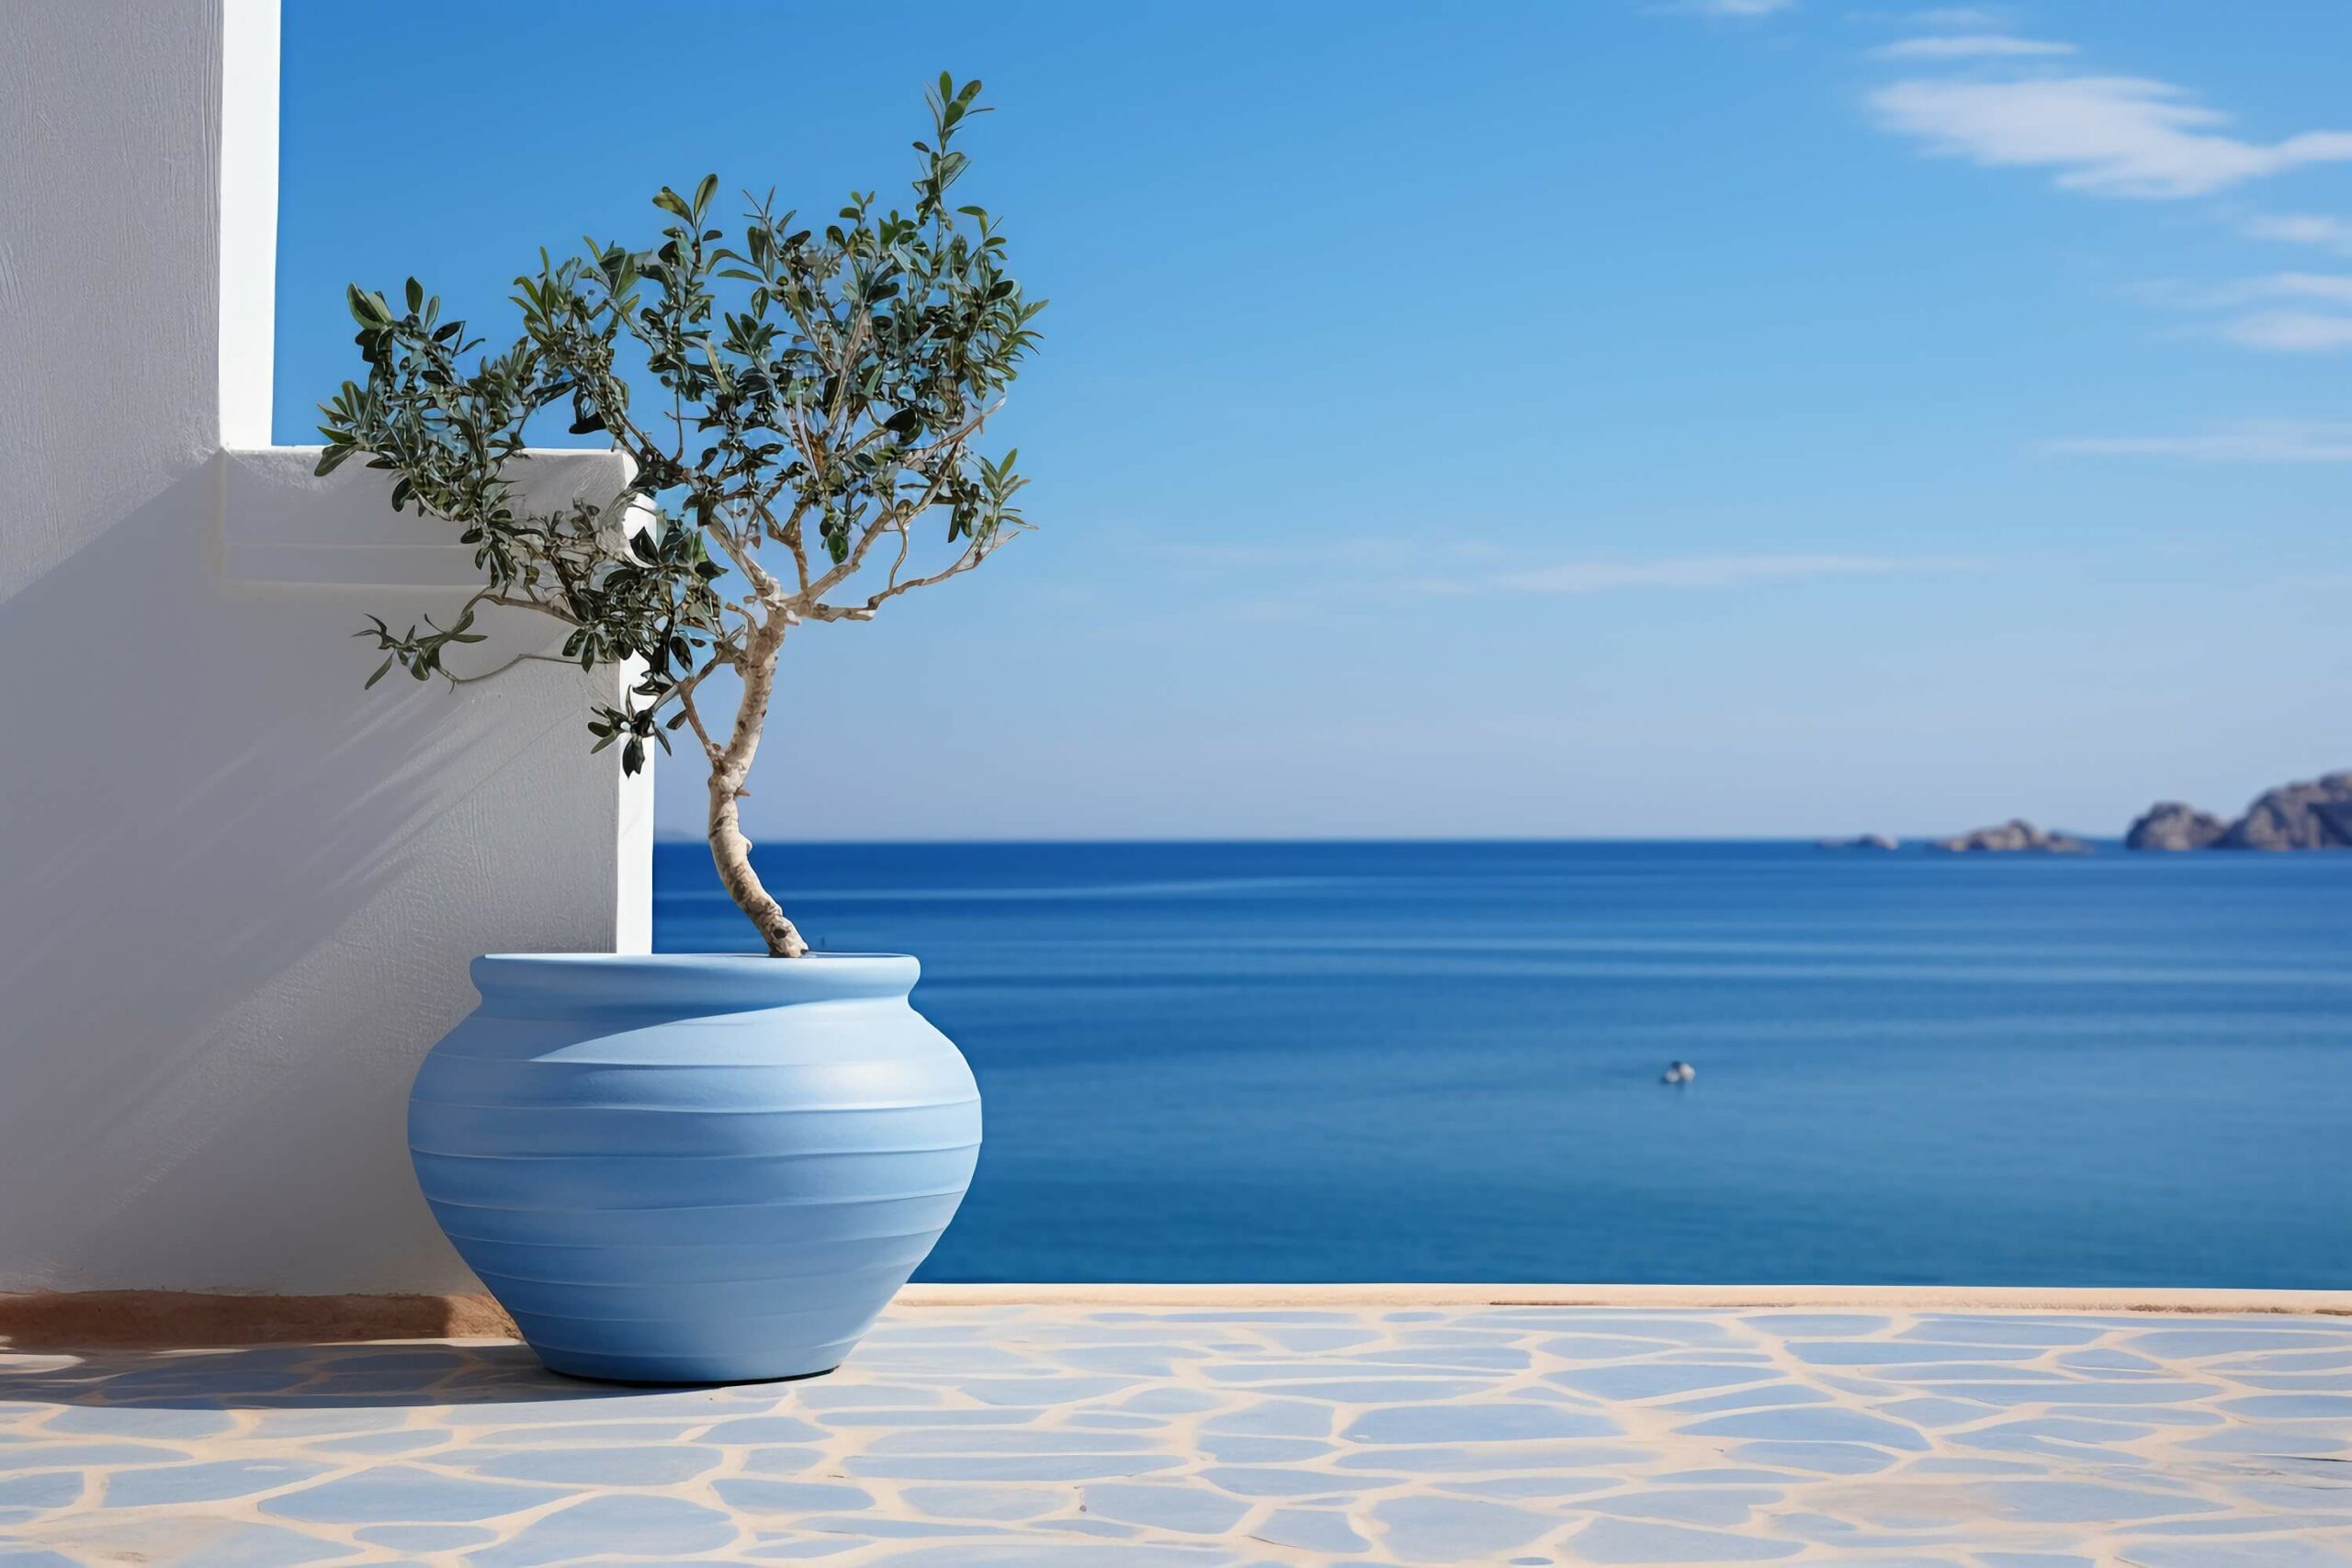 An olive tree in a blue pot on a balcony with a view of the ocean.